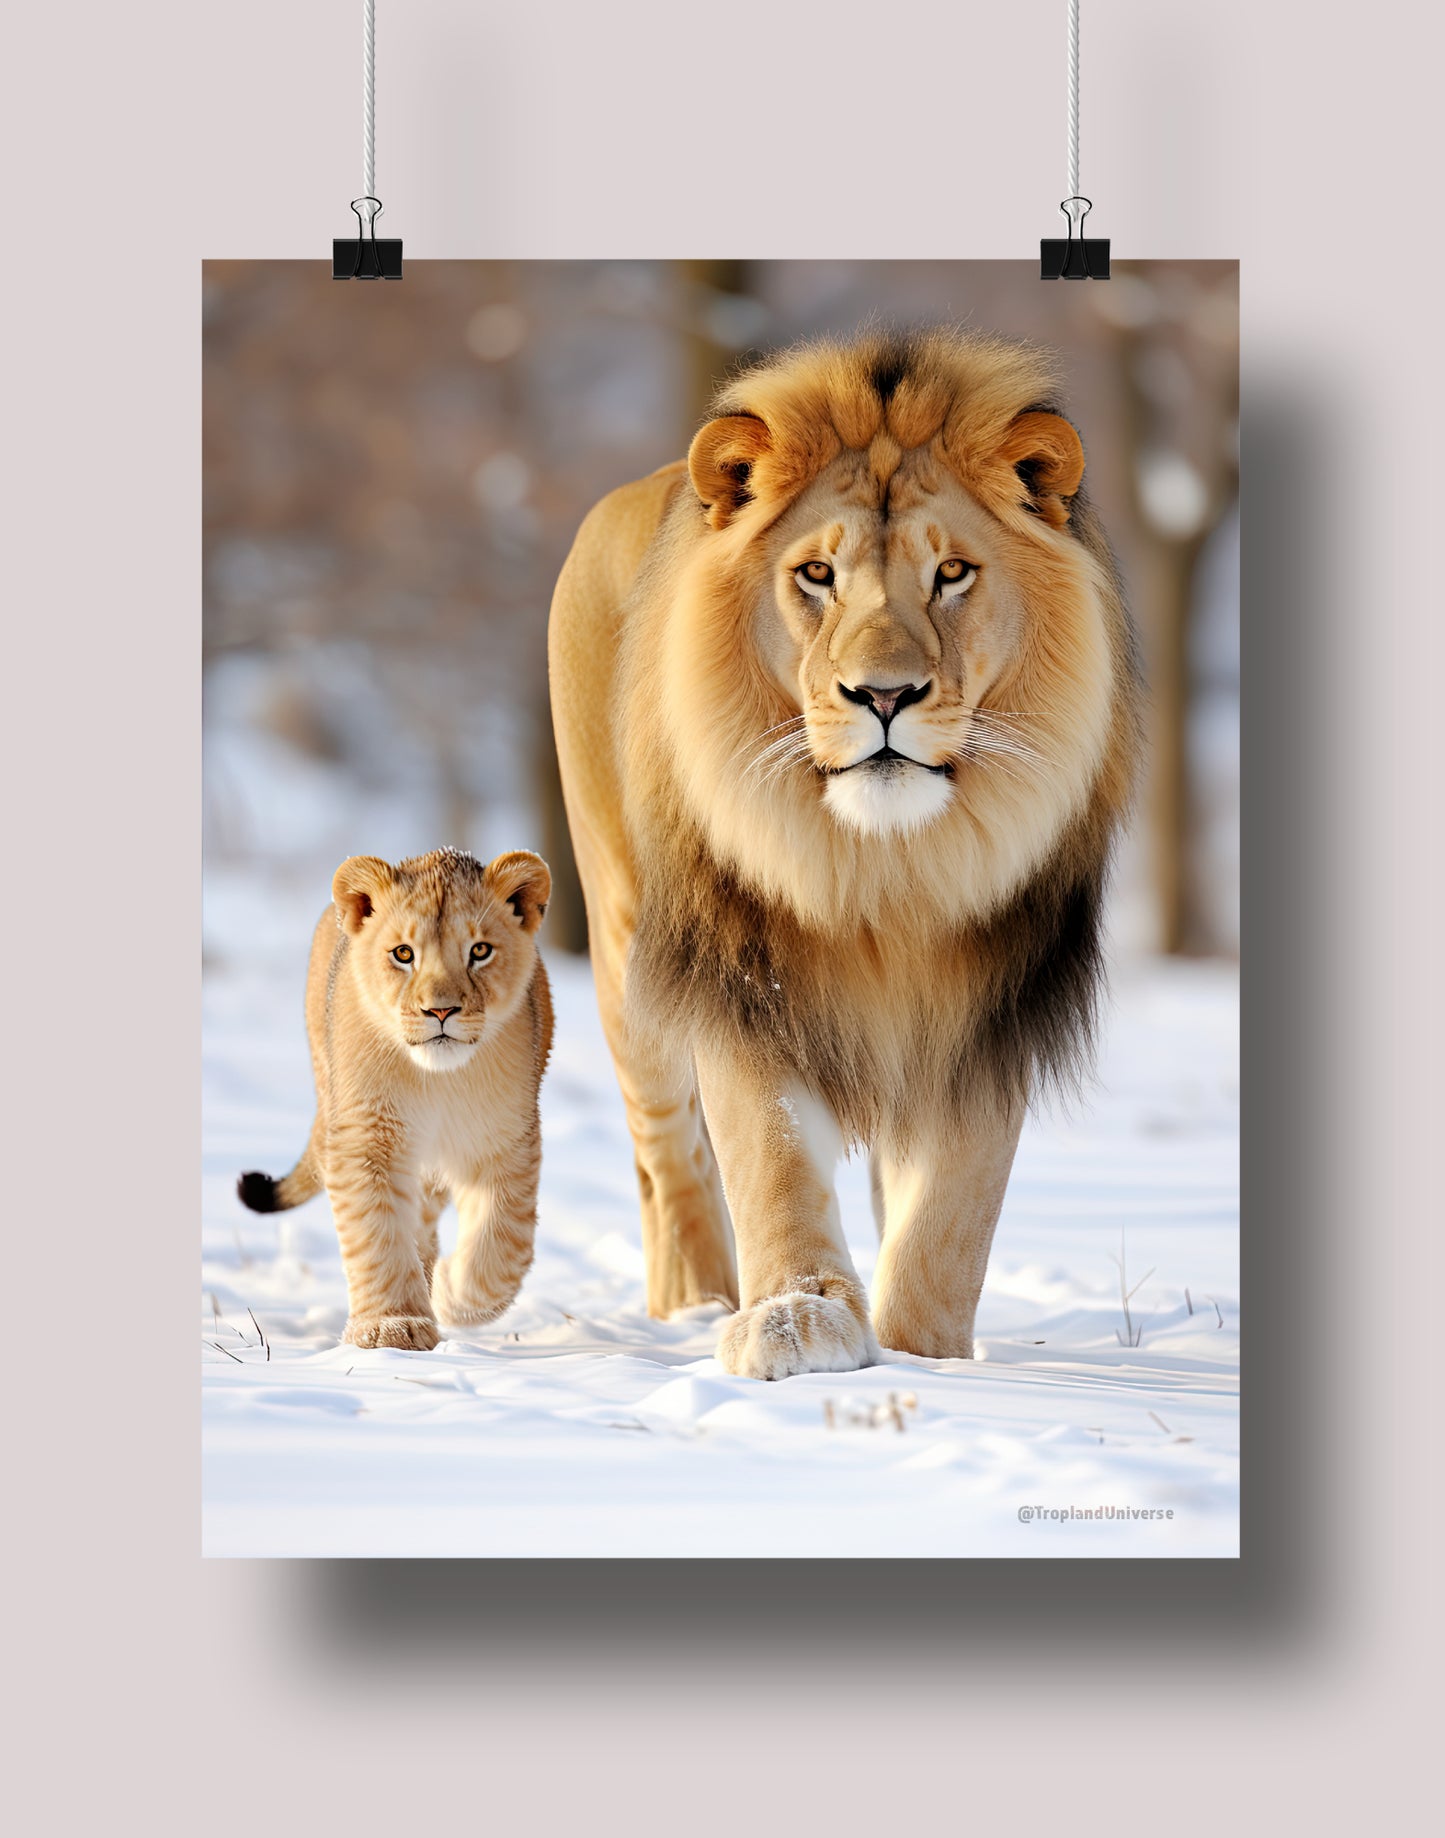 Lions in the Snow: Museum-Grade Poster - Tropland Universe